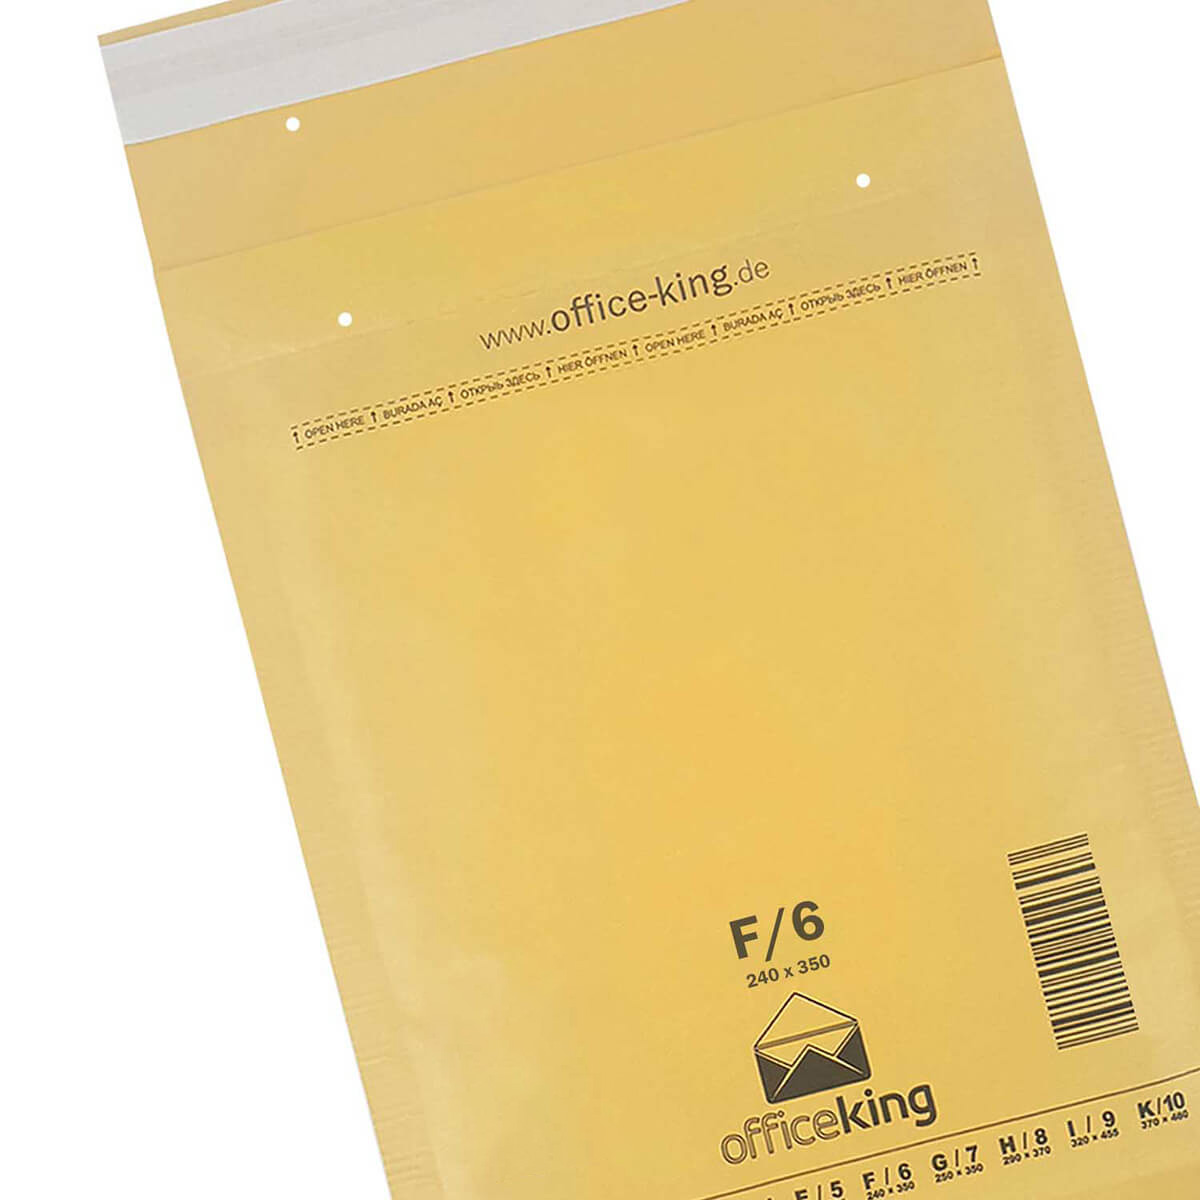 10x G7 Bubble mailers brown 250 x 350 mm - officeking